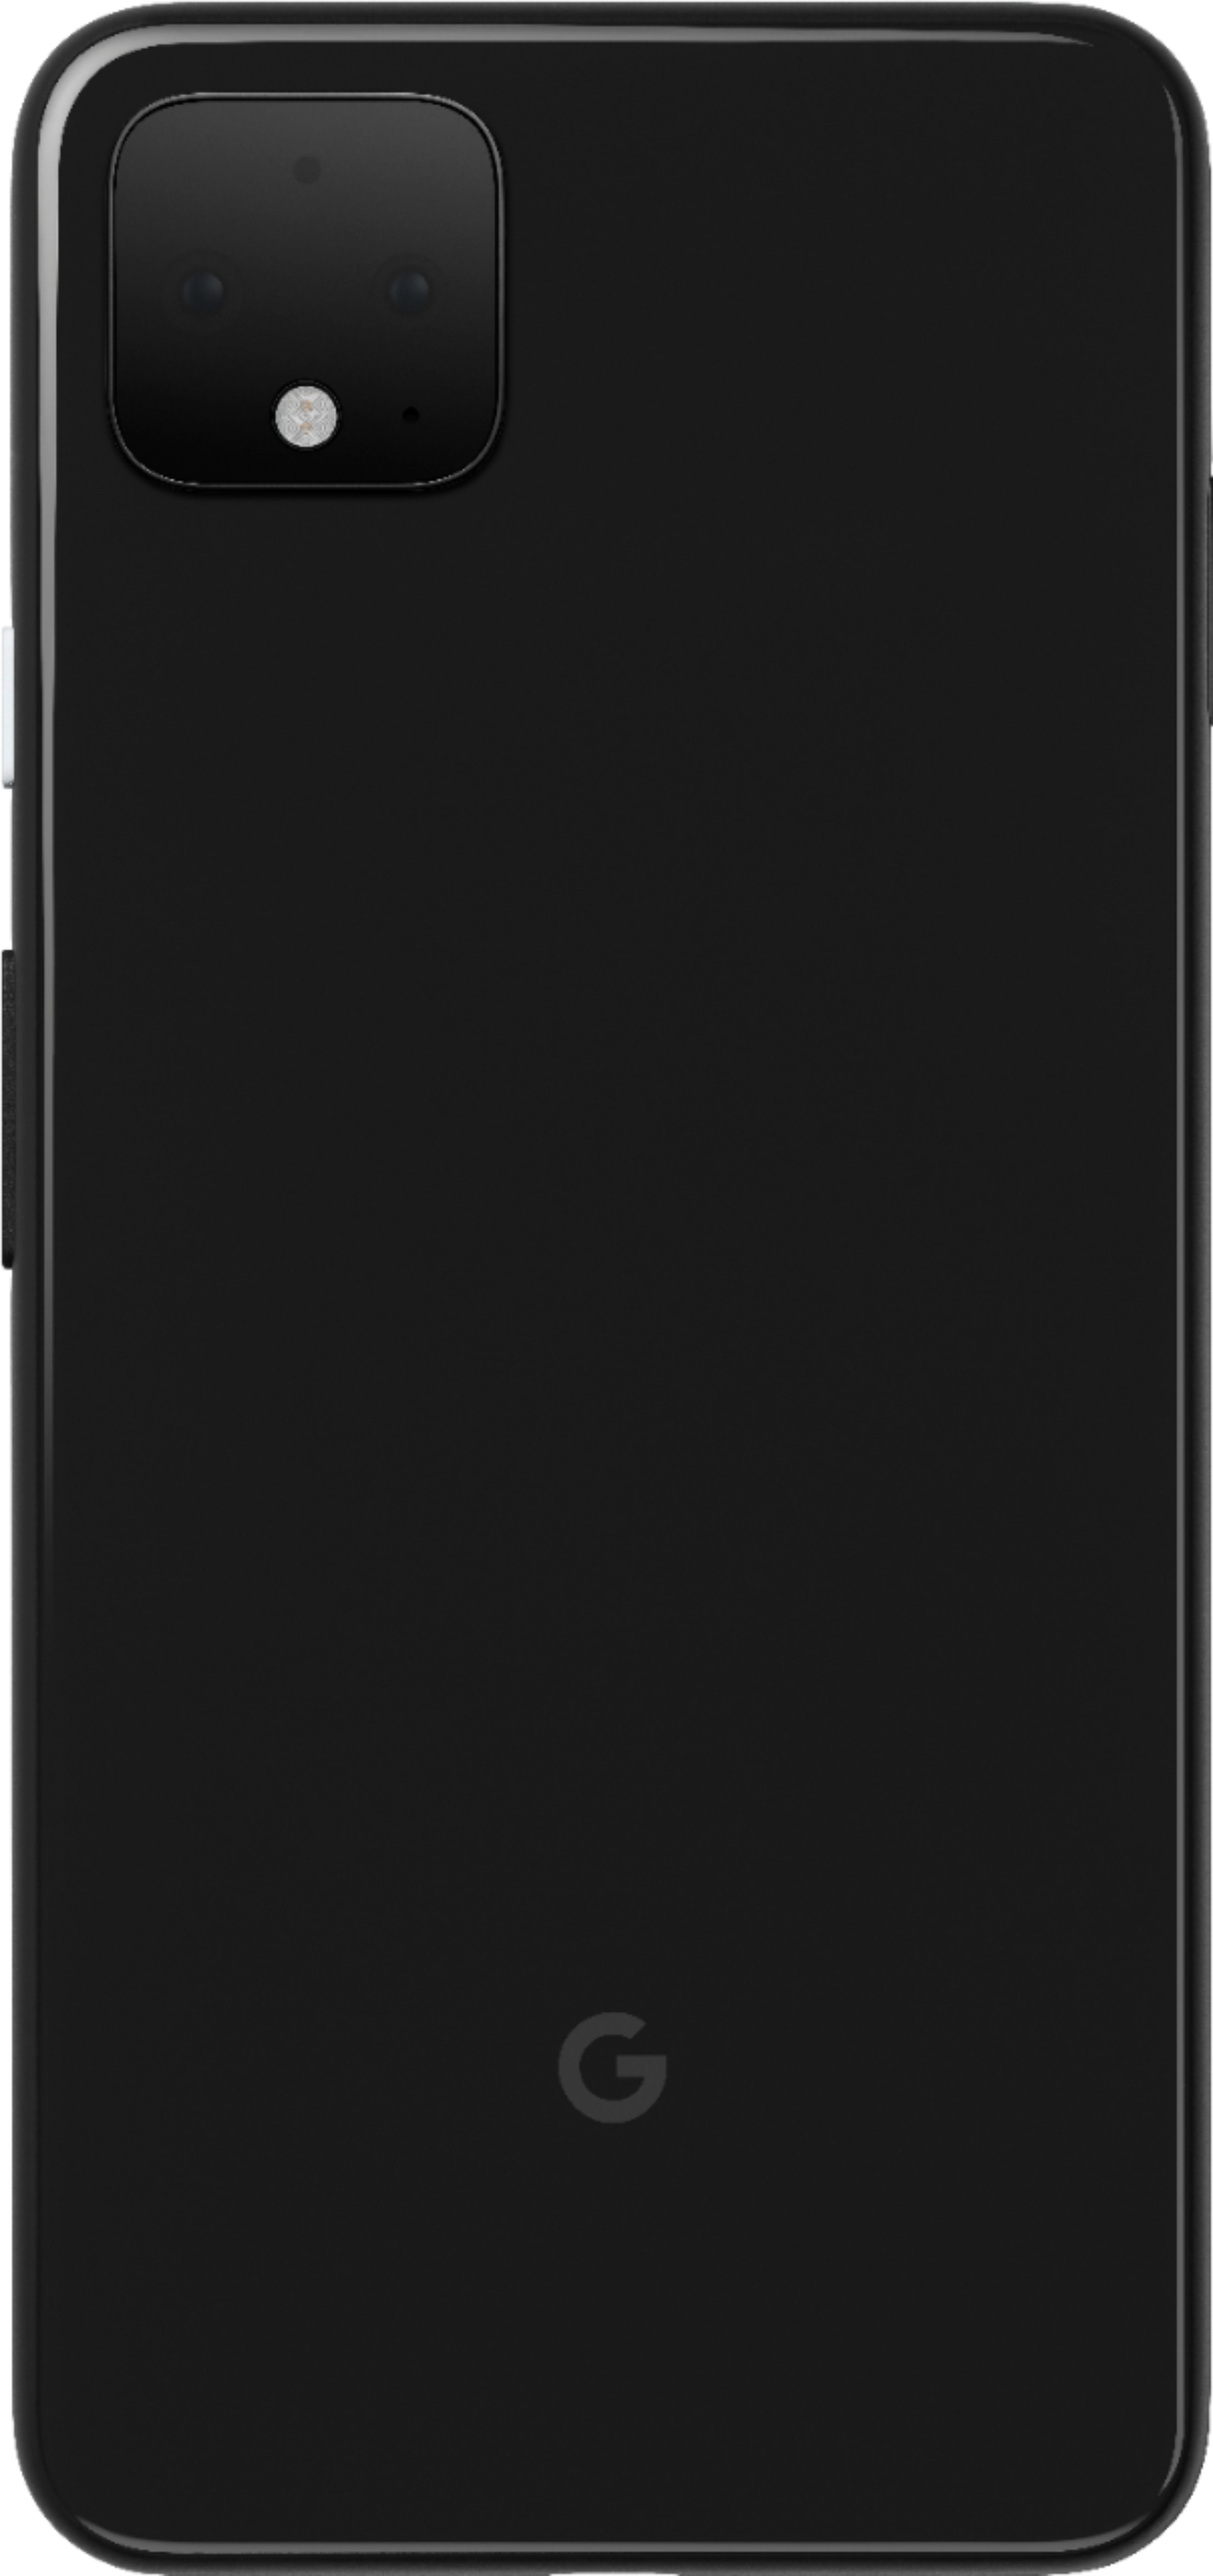 Google Geek Squad Certified Refurbished Pixel 4 XL with 64GB Cell 